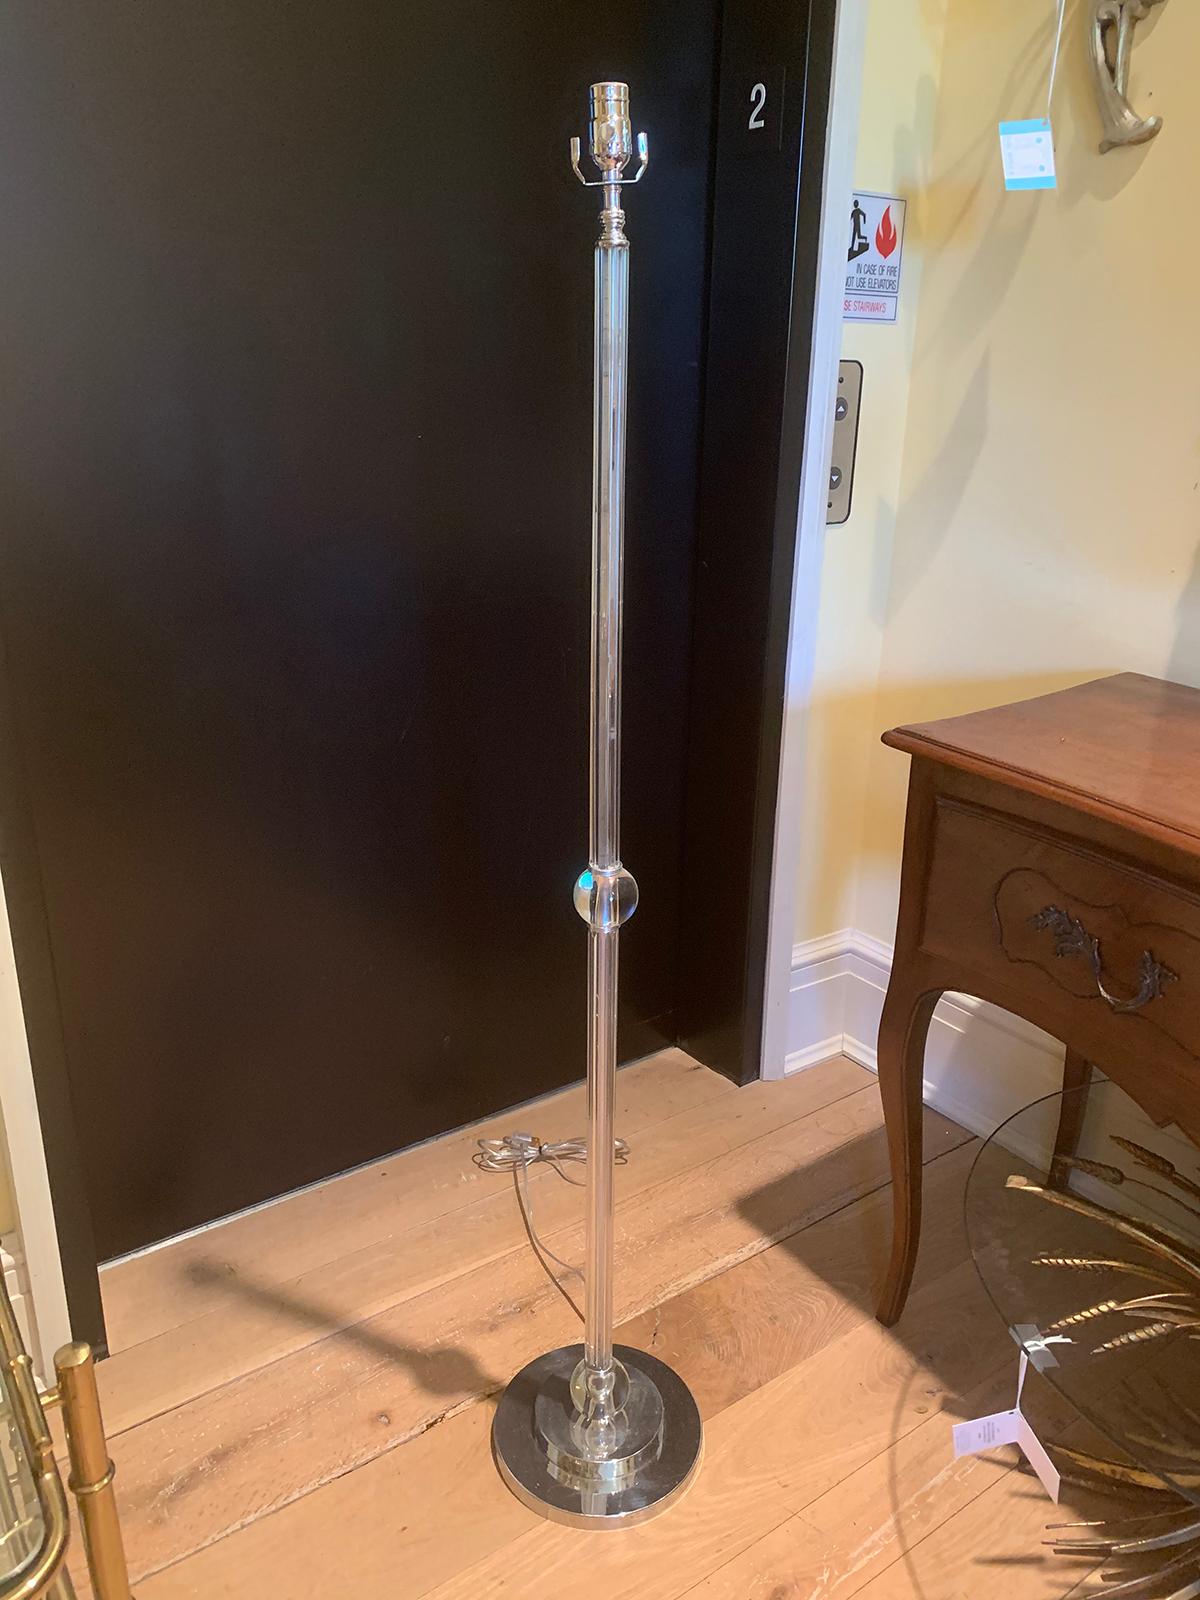 Early 20th century Art Deco crystal and chrome floor lamp
New wiring.